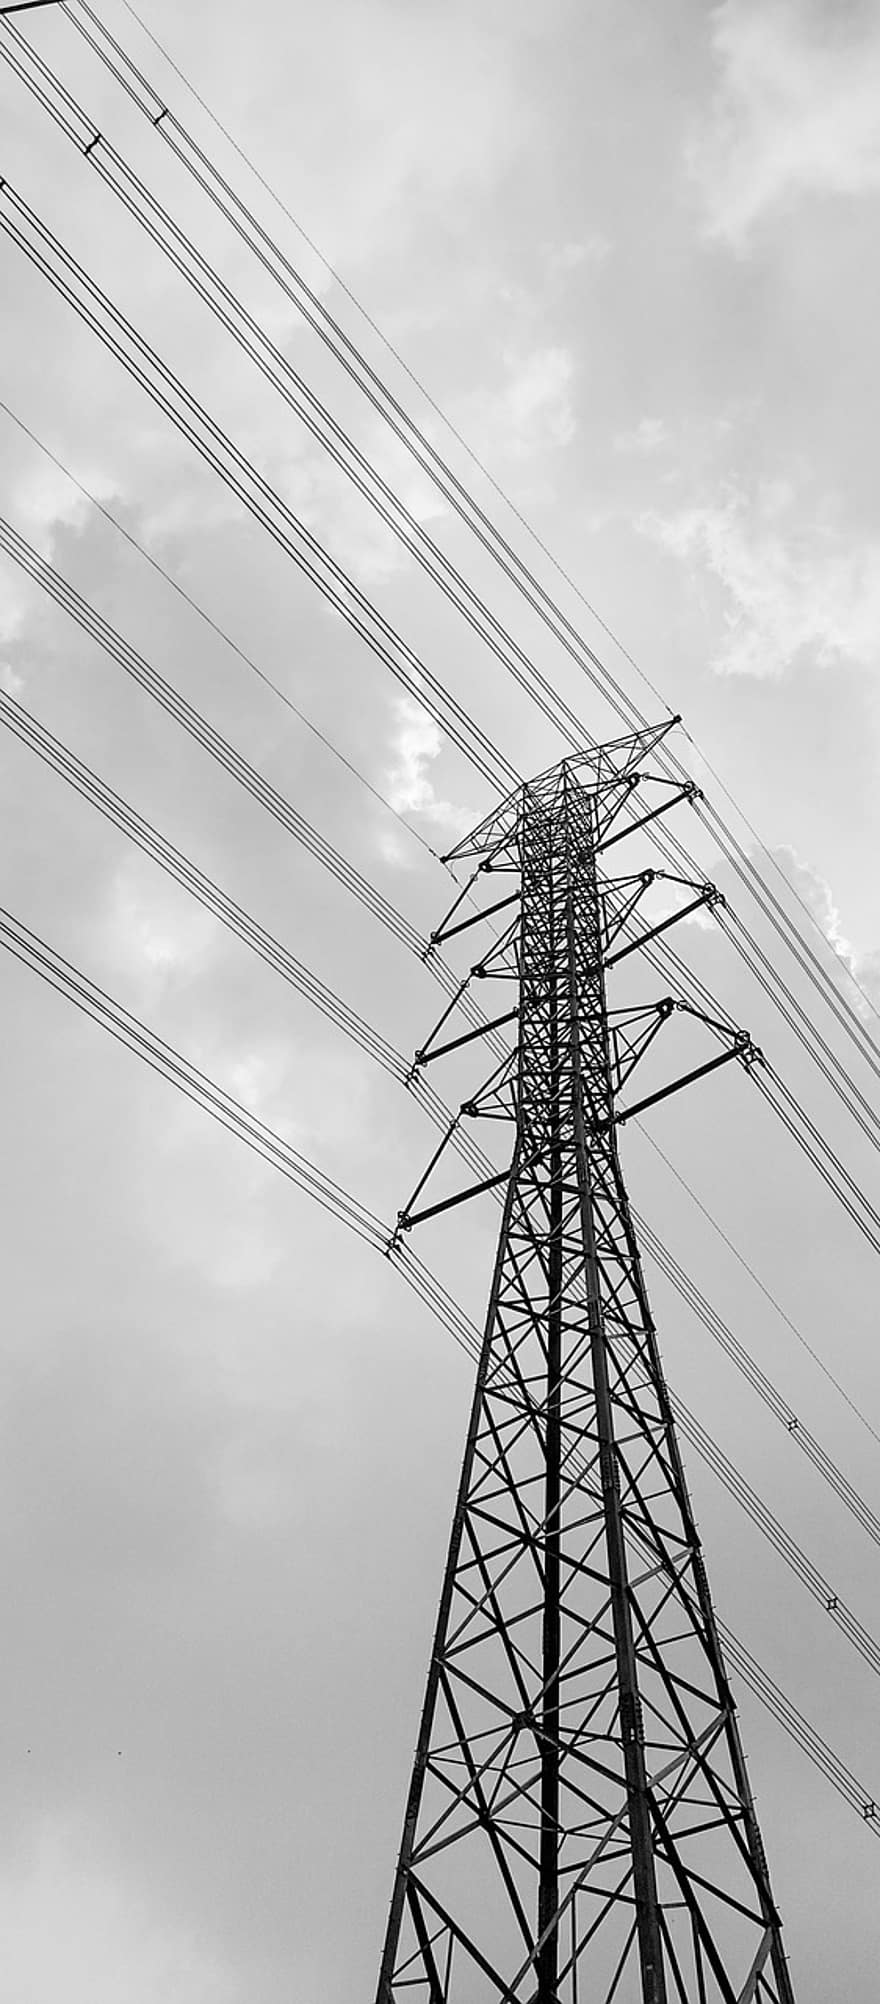 Electricity Pylon, Transmission Tower, Architecture, electricity, fuel and power generation, steel, power line, industry, power supply, technology, metal